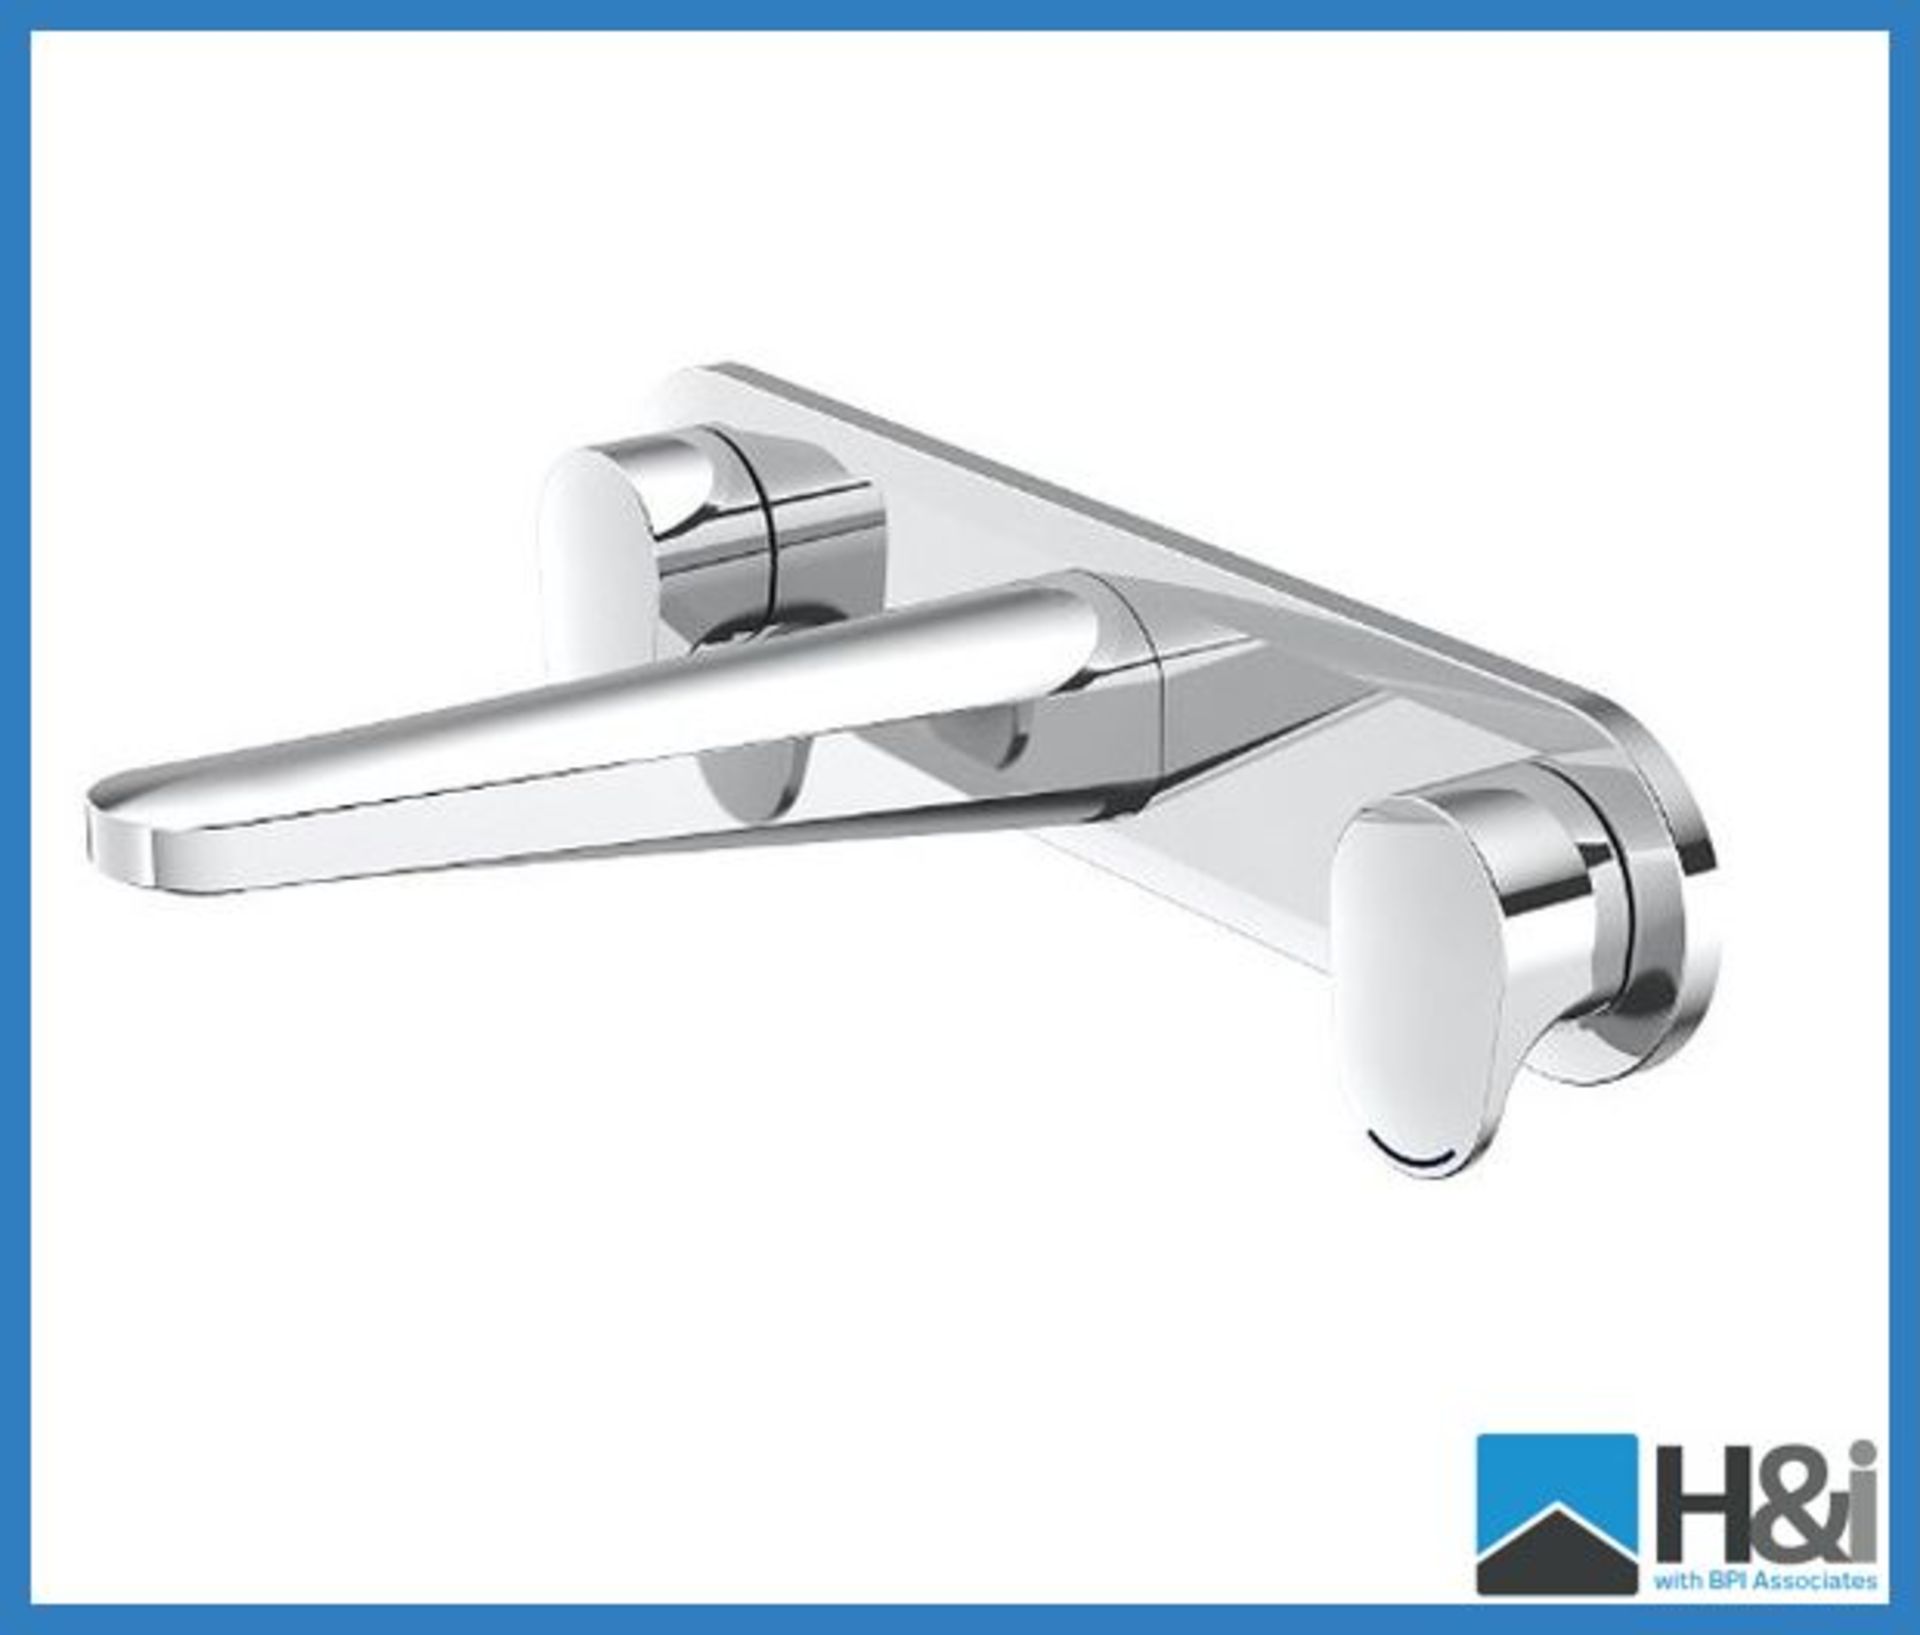 Designer Methven Kaha 3-Hole Wall Mounted Mixer with Backplate with Chrome Finish. Typical RRP 279